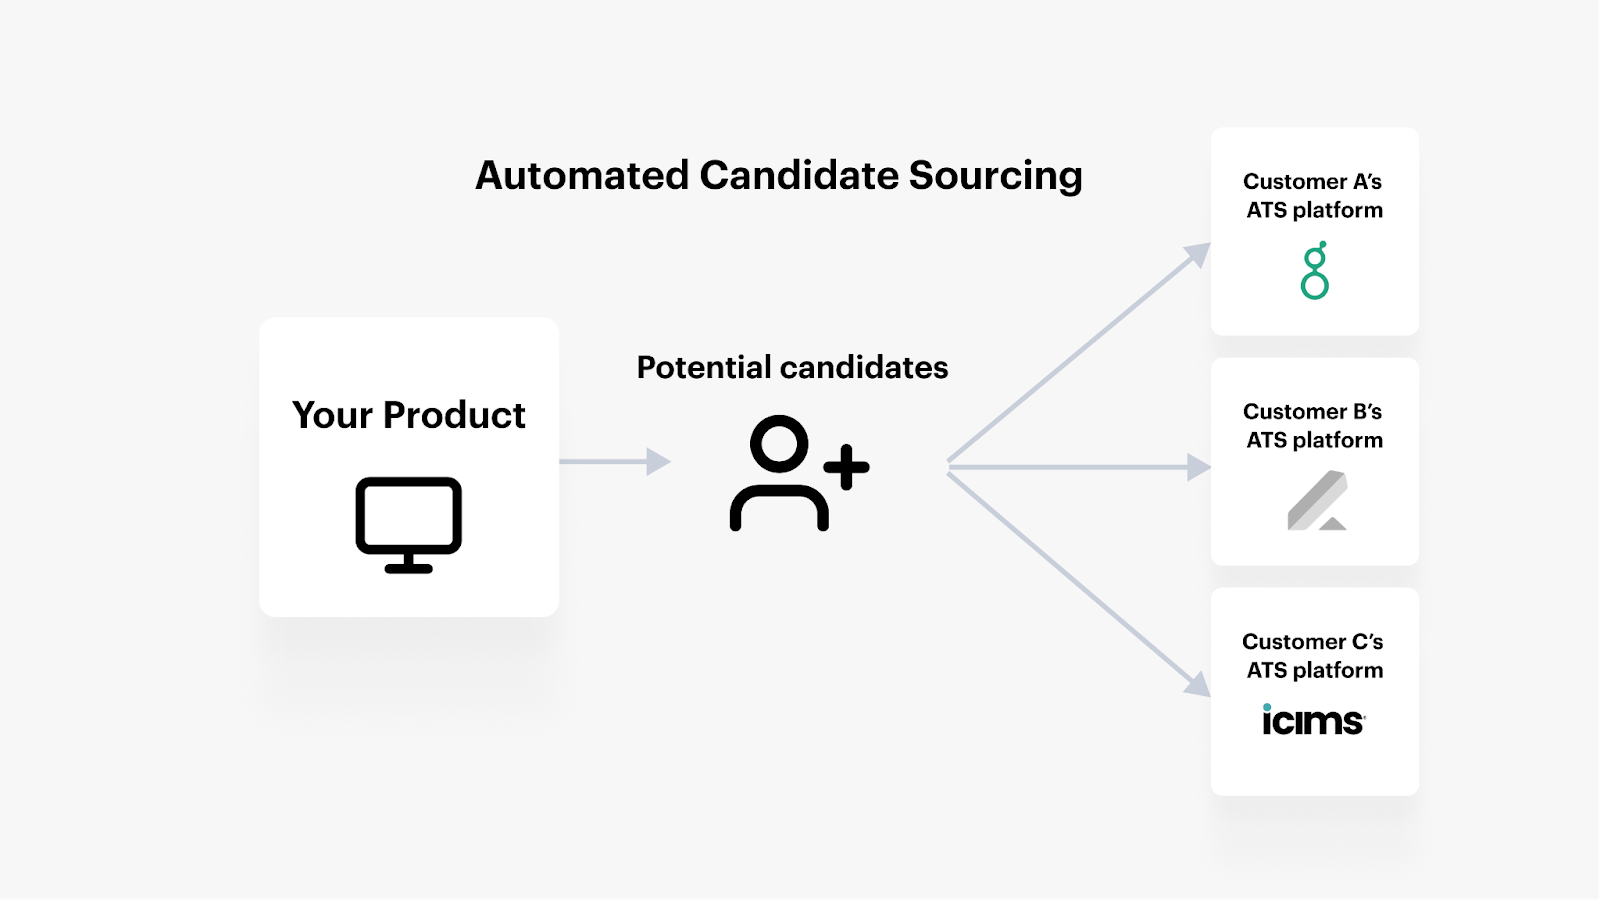 A visual breakdown of automating candidate sourcing